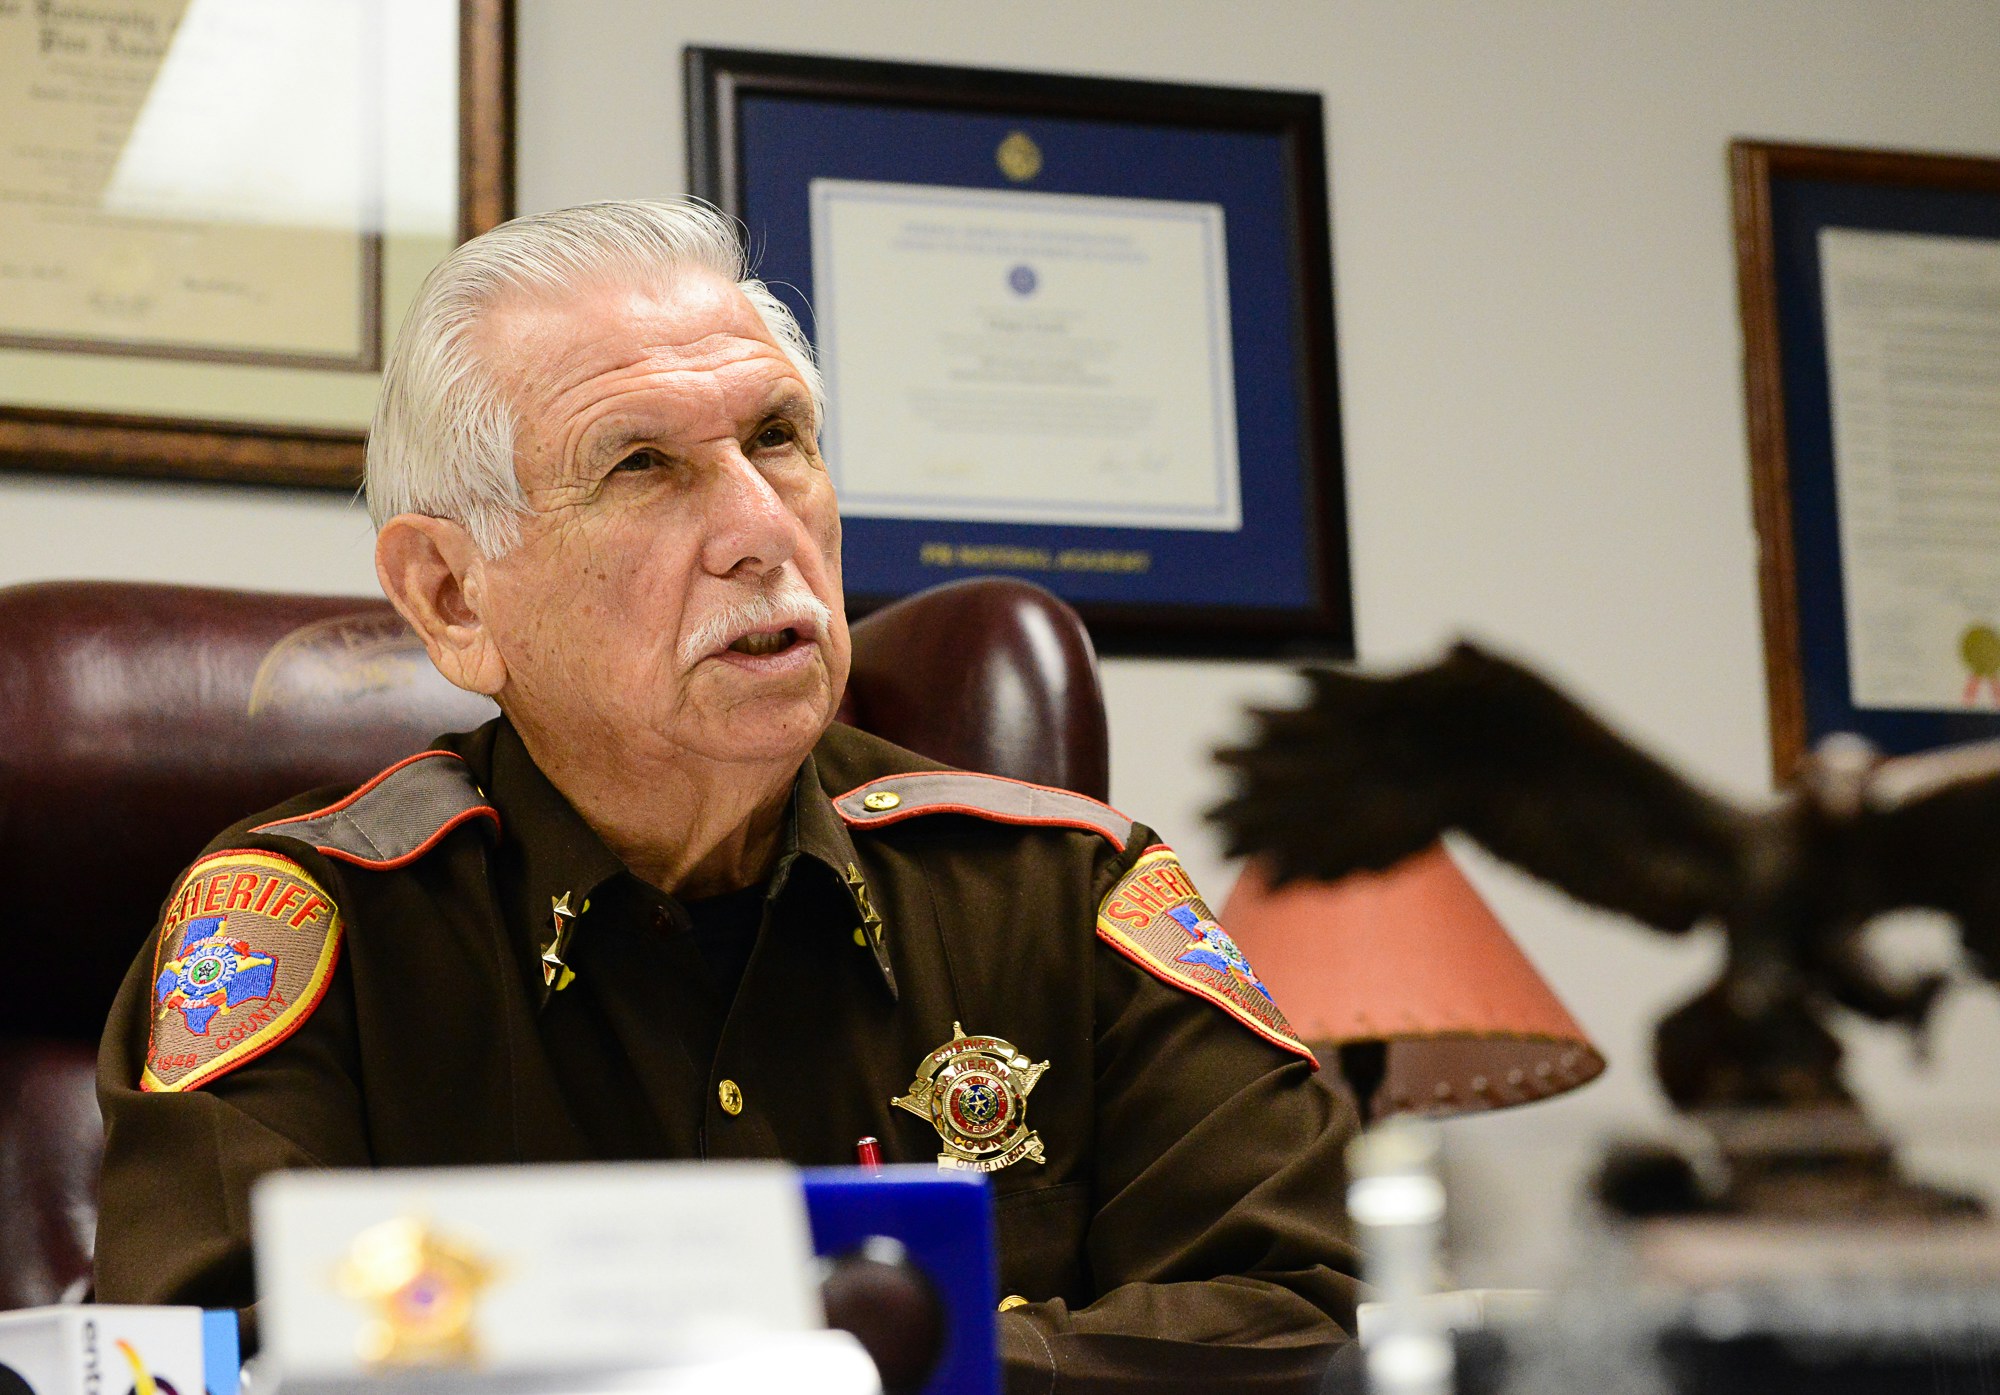 Cameron County Sheriff Omar Lucio speaks to the media at a conference on Wednesday, July 20, 2016, in Brownsville, Texas. Lucio discussed two recent incidents, an armed robbery in La Feria, and an arrest of two young men who are now charged with transporting narcotics in Brownsville. (Jason Hoekema/The Brownsville Herald via AP)